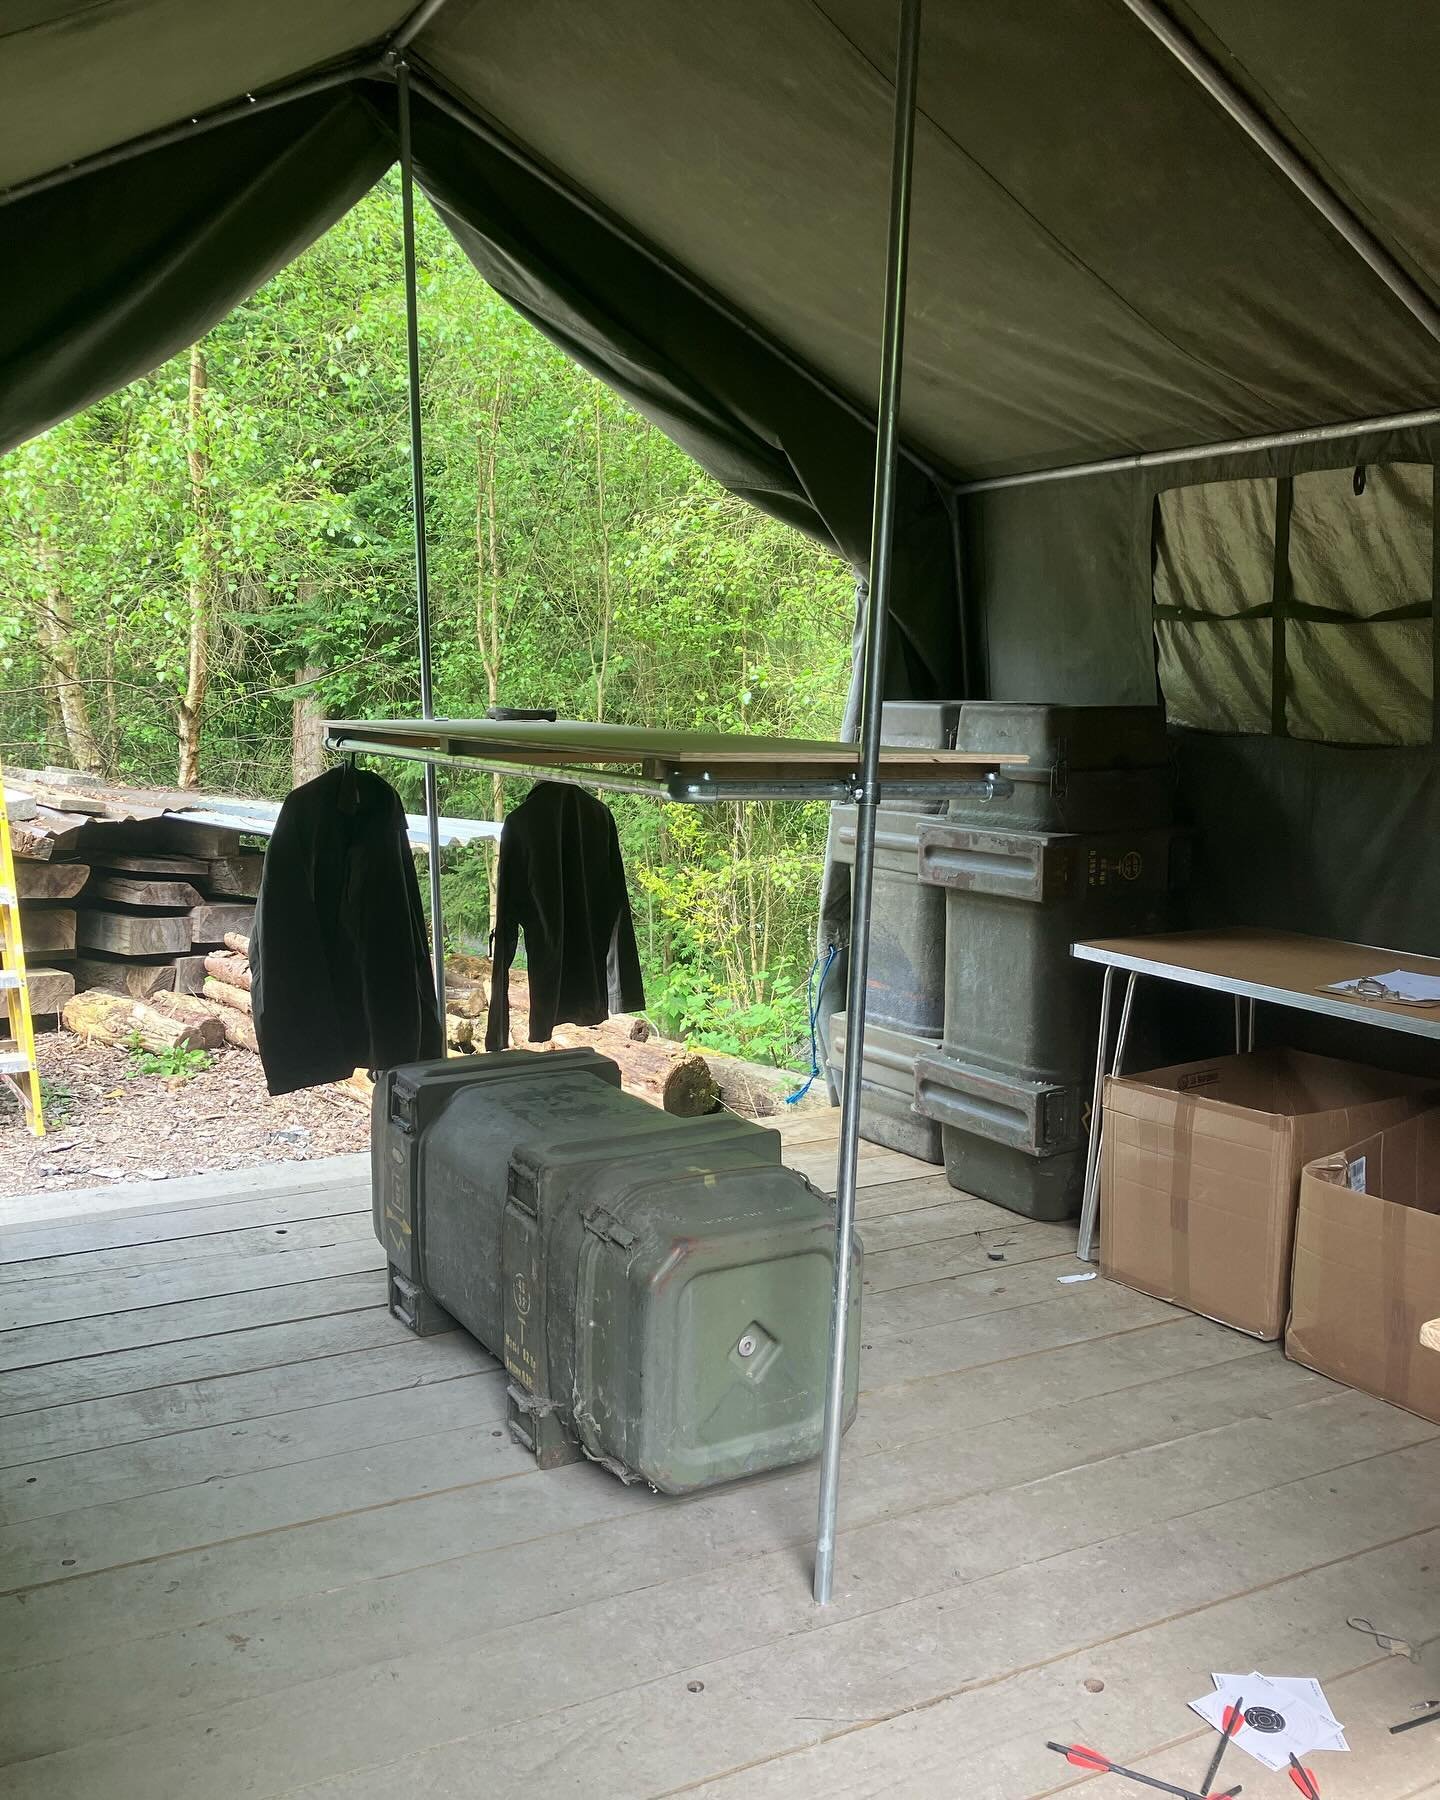 Getting the old 12x12 fitted out ready for the upcoming visit to @thebushcraftshow it will be packed out with #prepping , #survival and #bushcraft supplies . Get 15% off tickets with code TBS15
#wildcampinguk #wildcamping #bugout #midwales #cambrianm